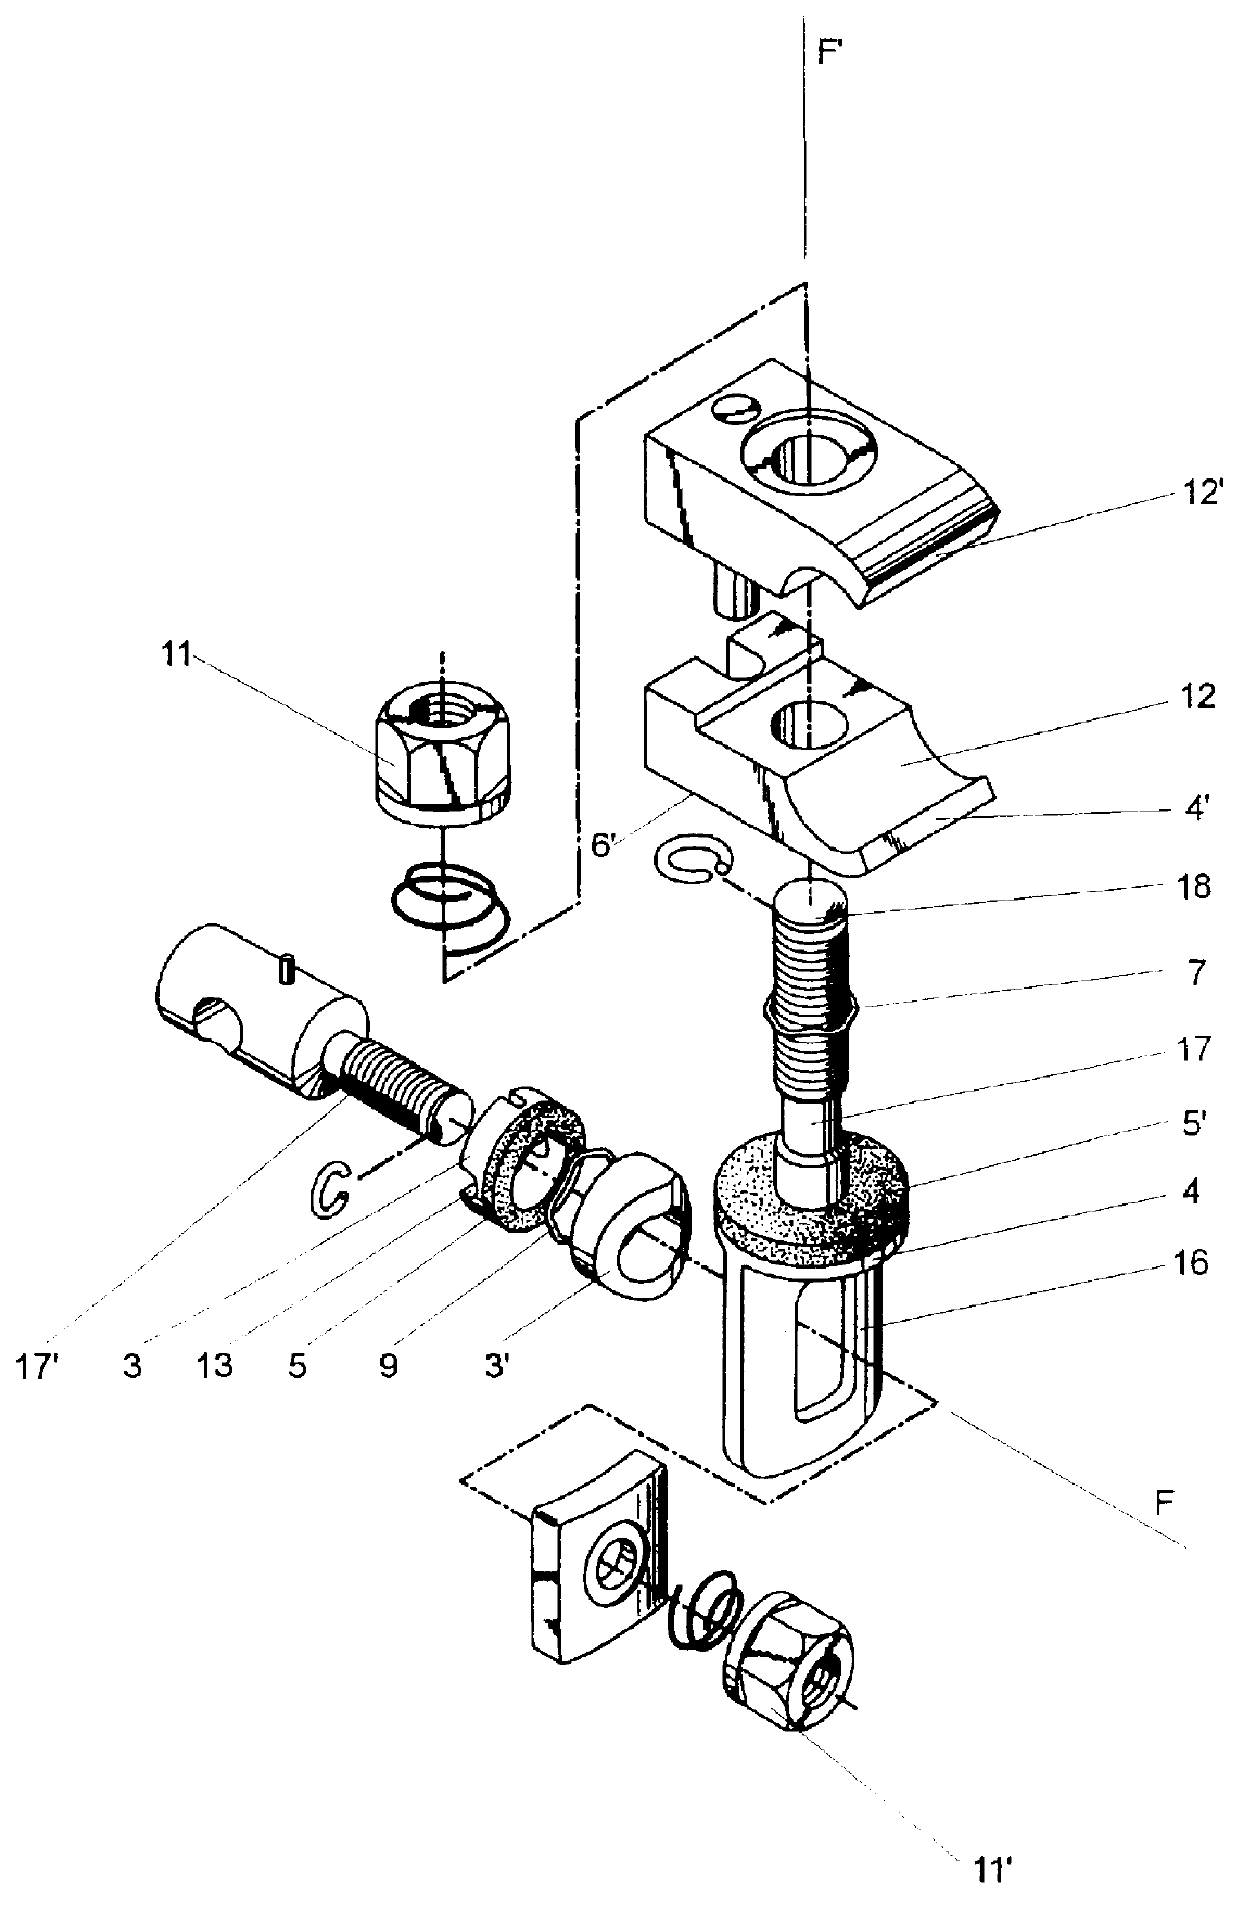 Clamping connection for medical equipment and apparatus